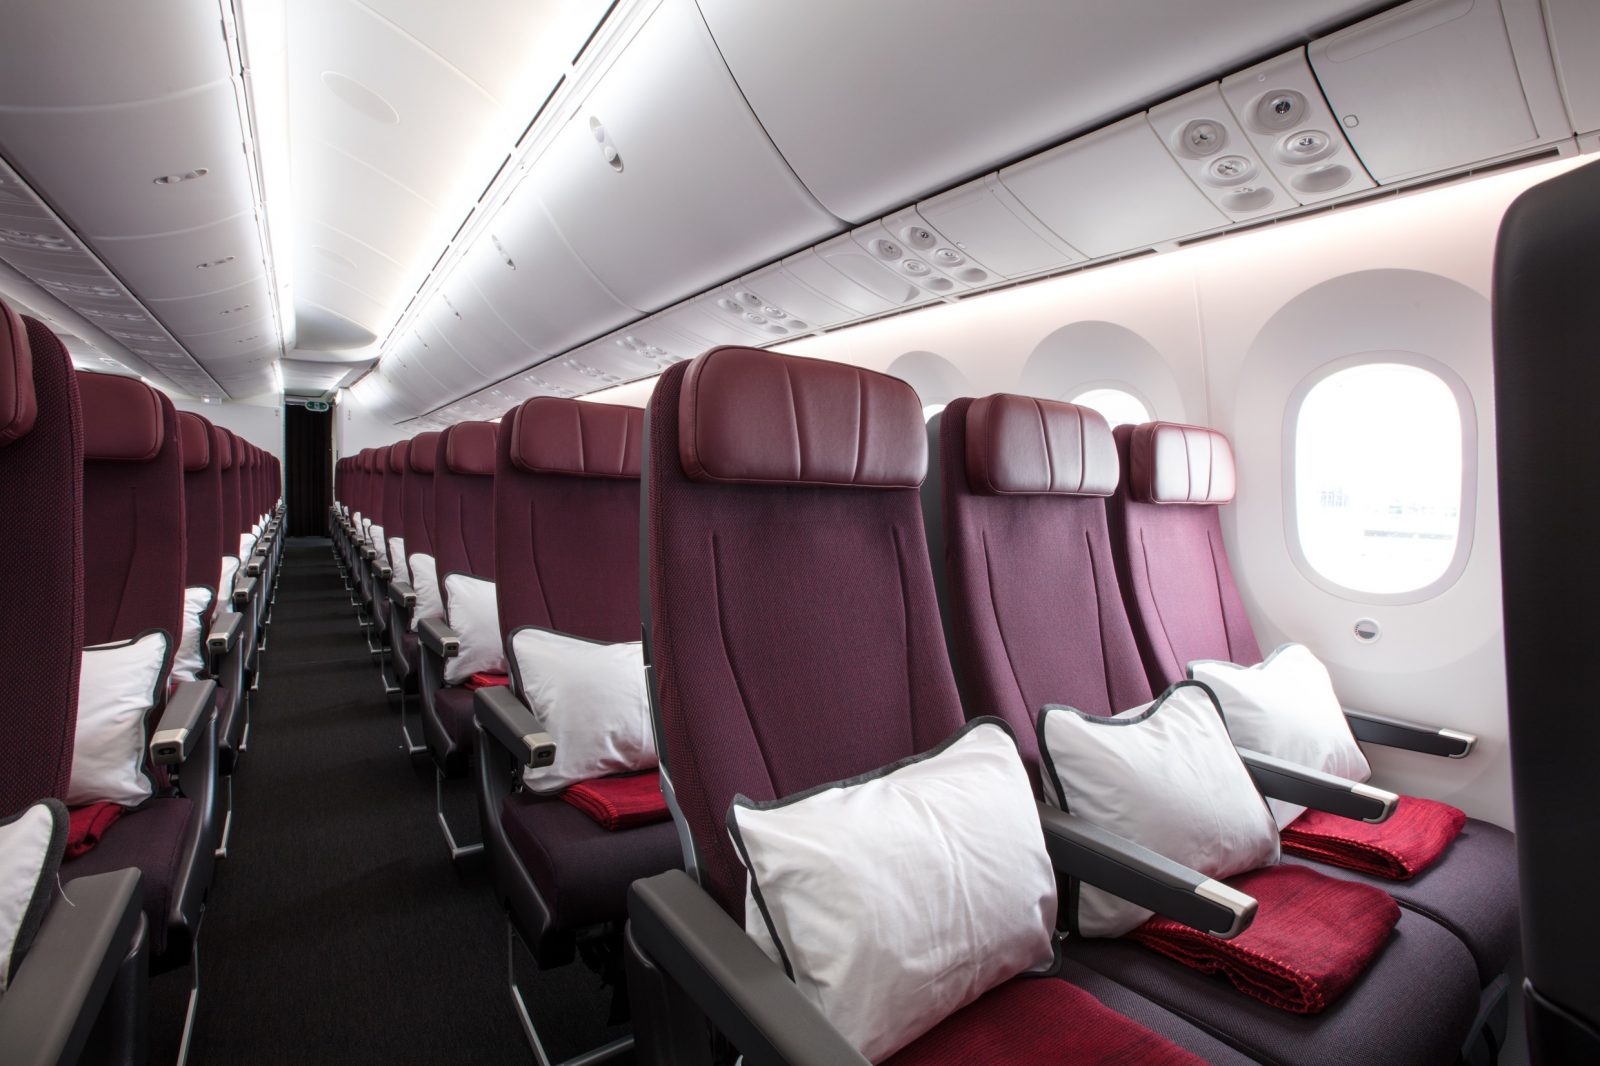 Qantas says even customers in Economy will benefit from increased space on its Boeing 787-9 Dreamliner's. Photo Credit: Qantas